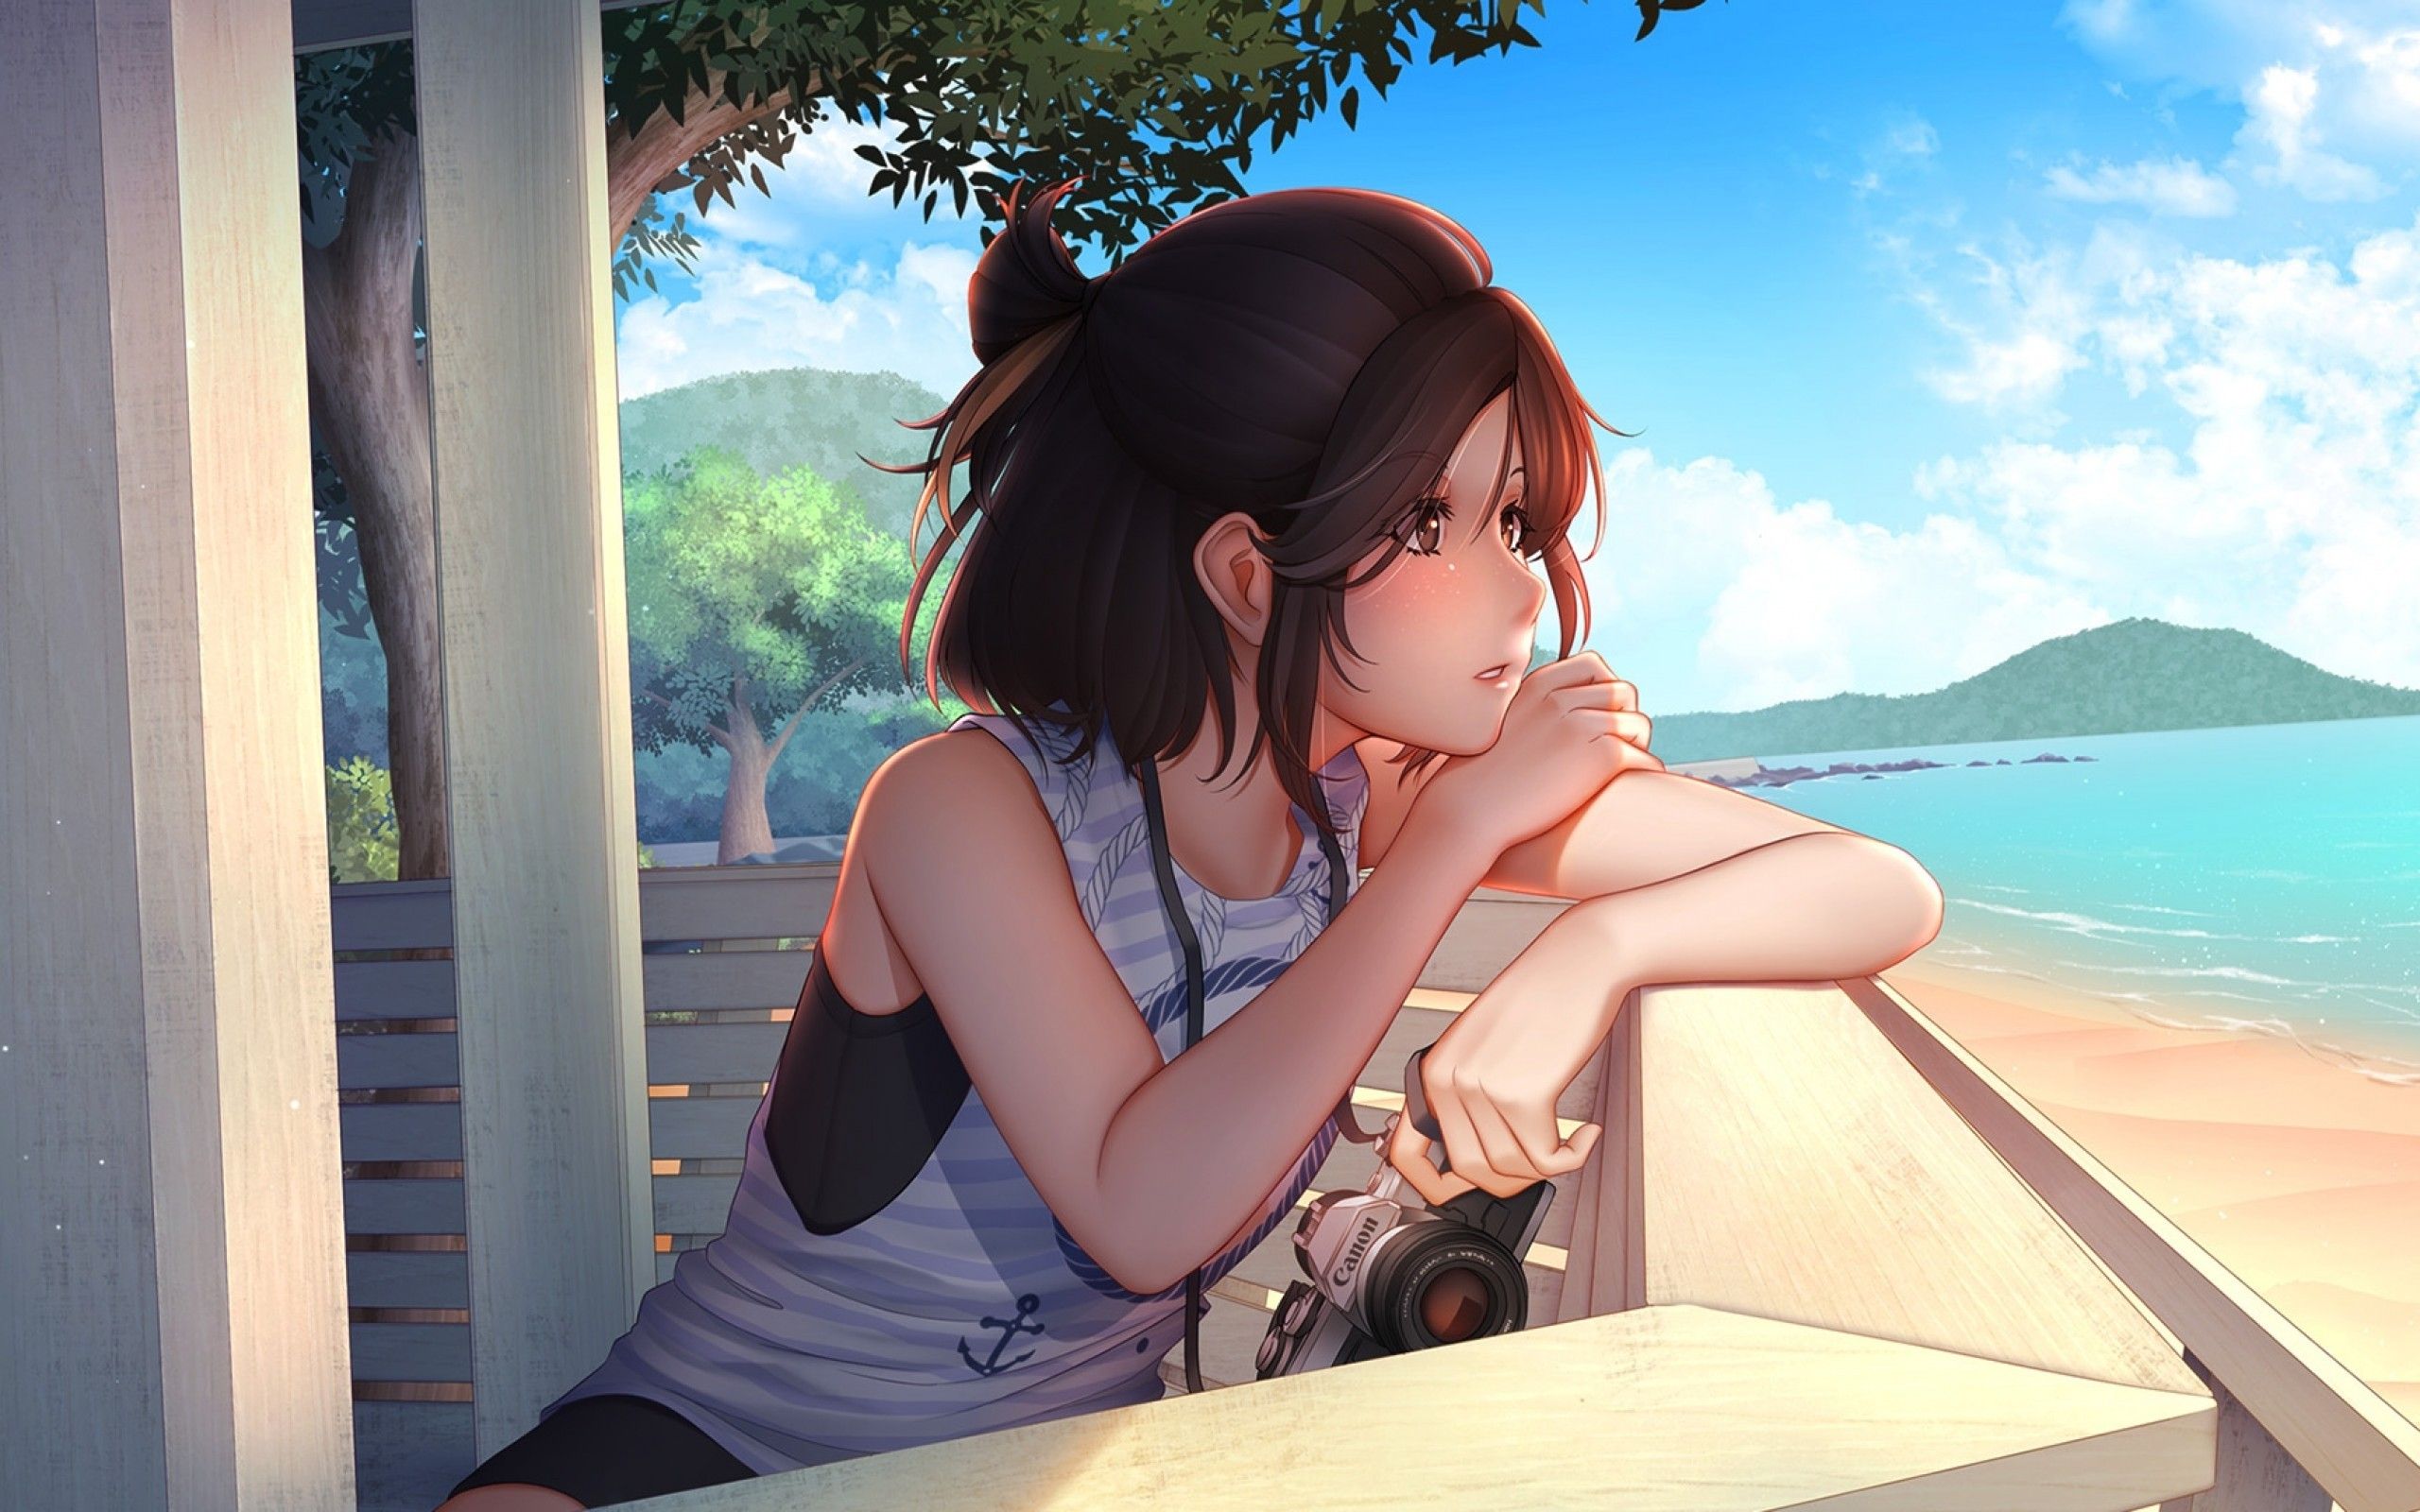 Download 2560x1600 Anime Girl, Summer, Cannon, Looking Away, Semi Realistic, Beach, Sky, Profile View Wallpaper for MacBook Pro 13 inch